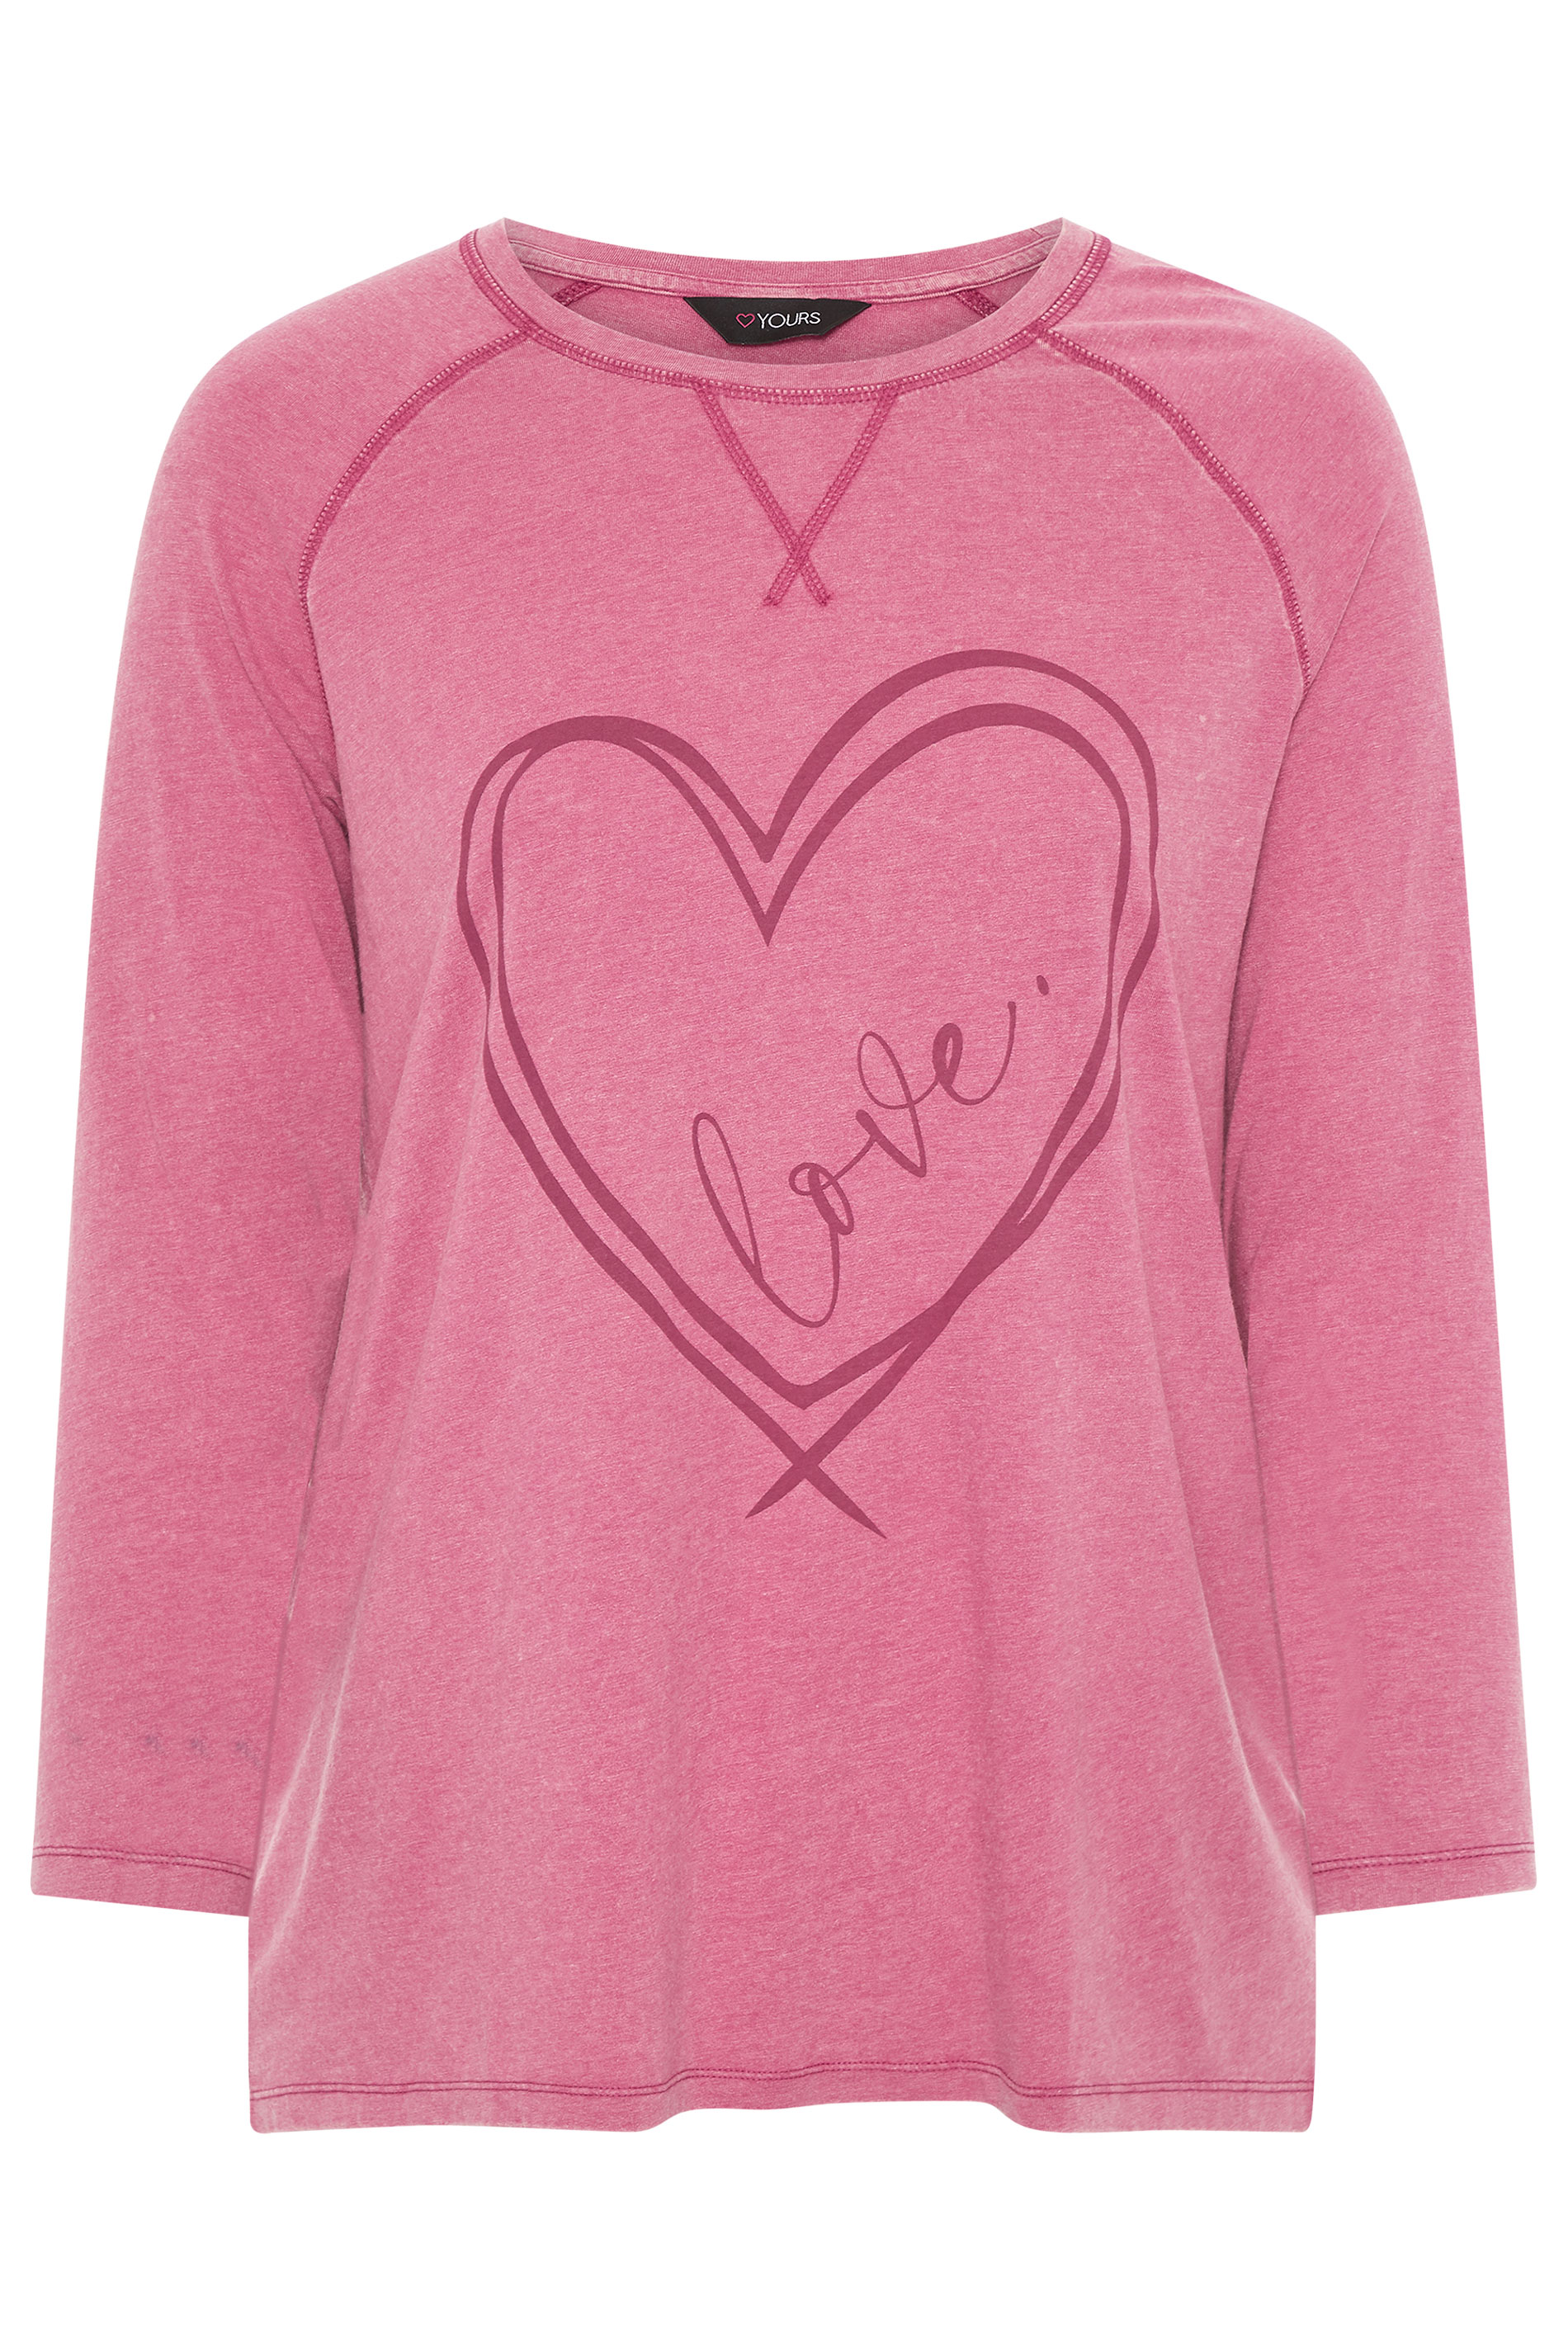 Pink Acid Wash Love Heart Print Top | Yours Clothing